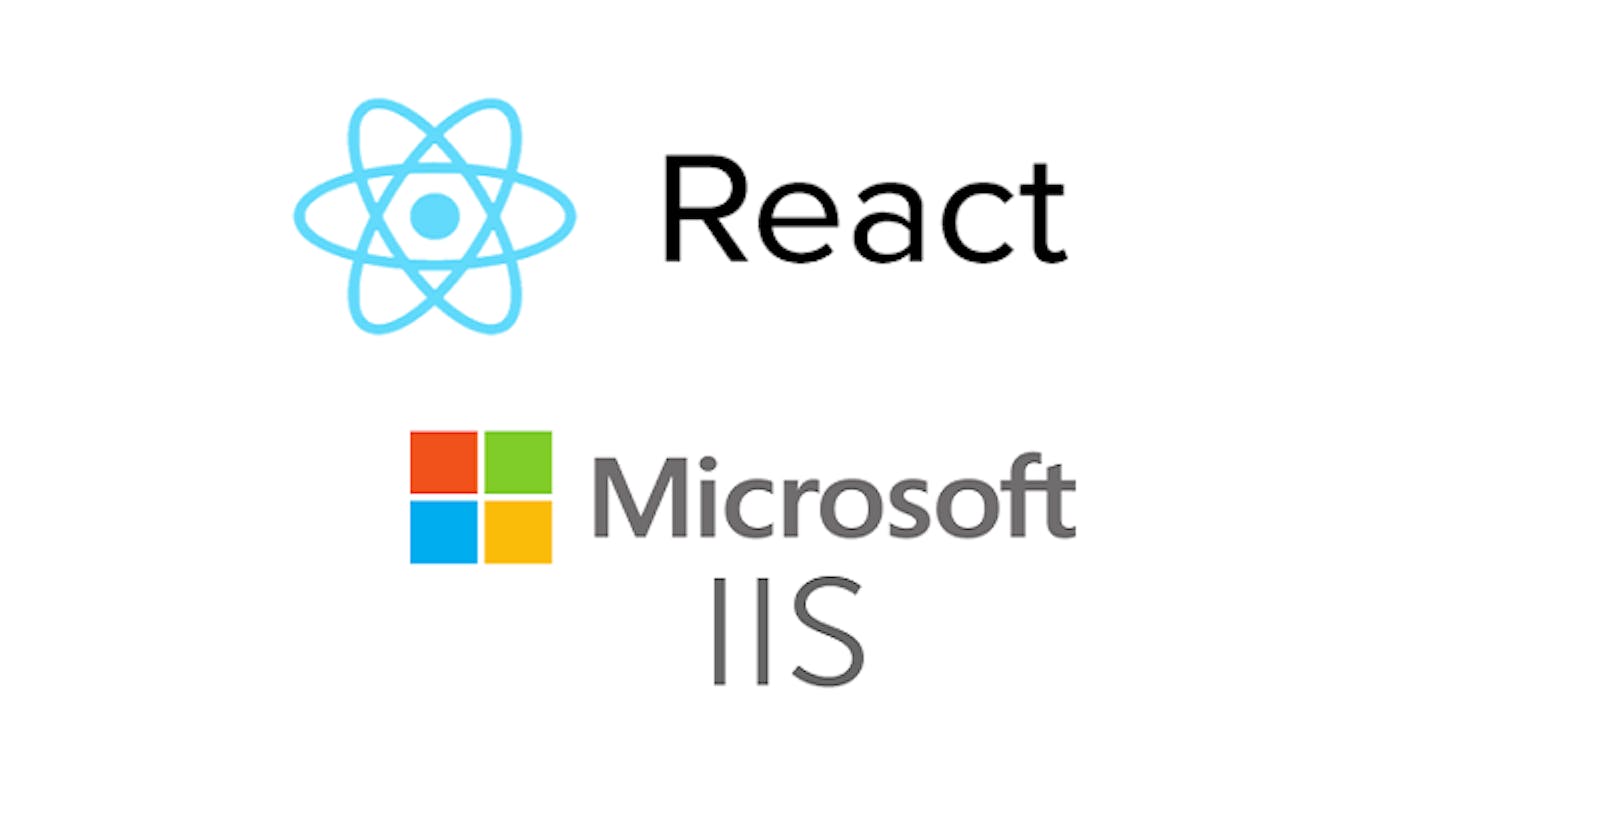 How to deploy React Application on IIS Server